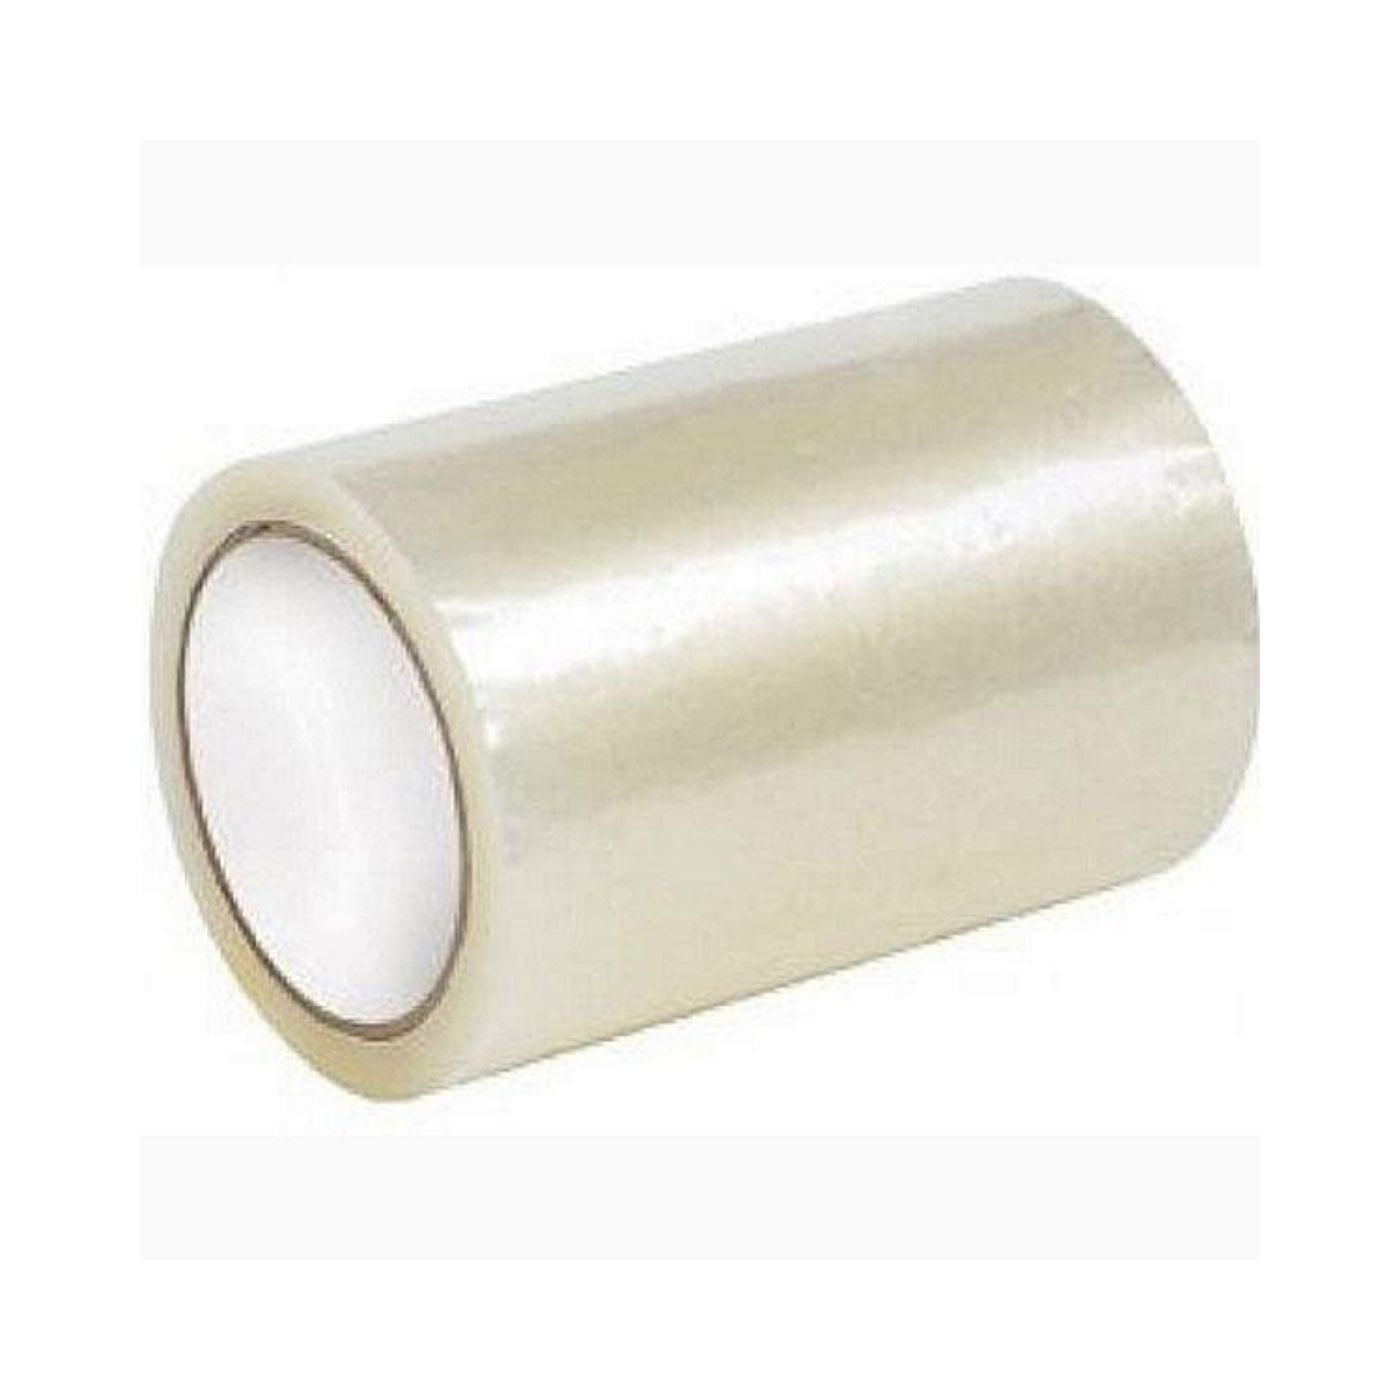 Merco Cold Weather FSK Tape 72mm x 55yd full case of 16 rolls! 